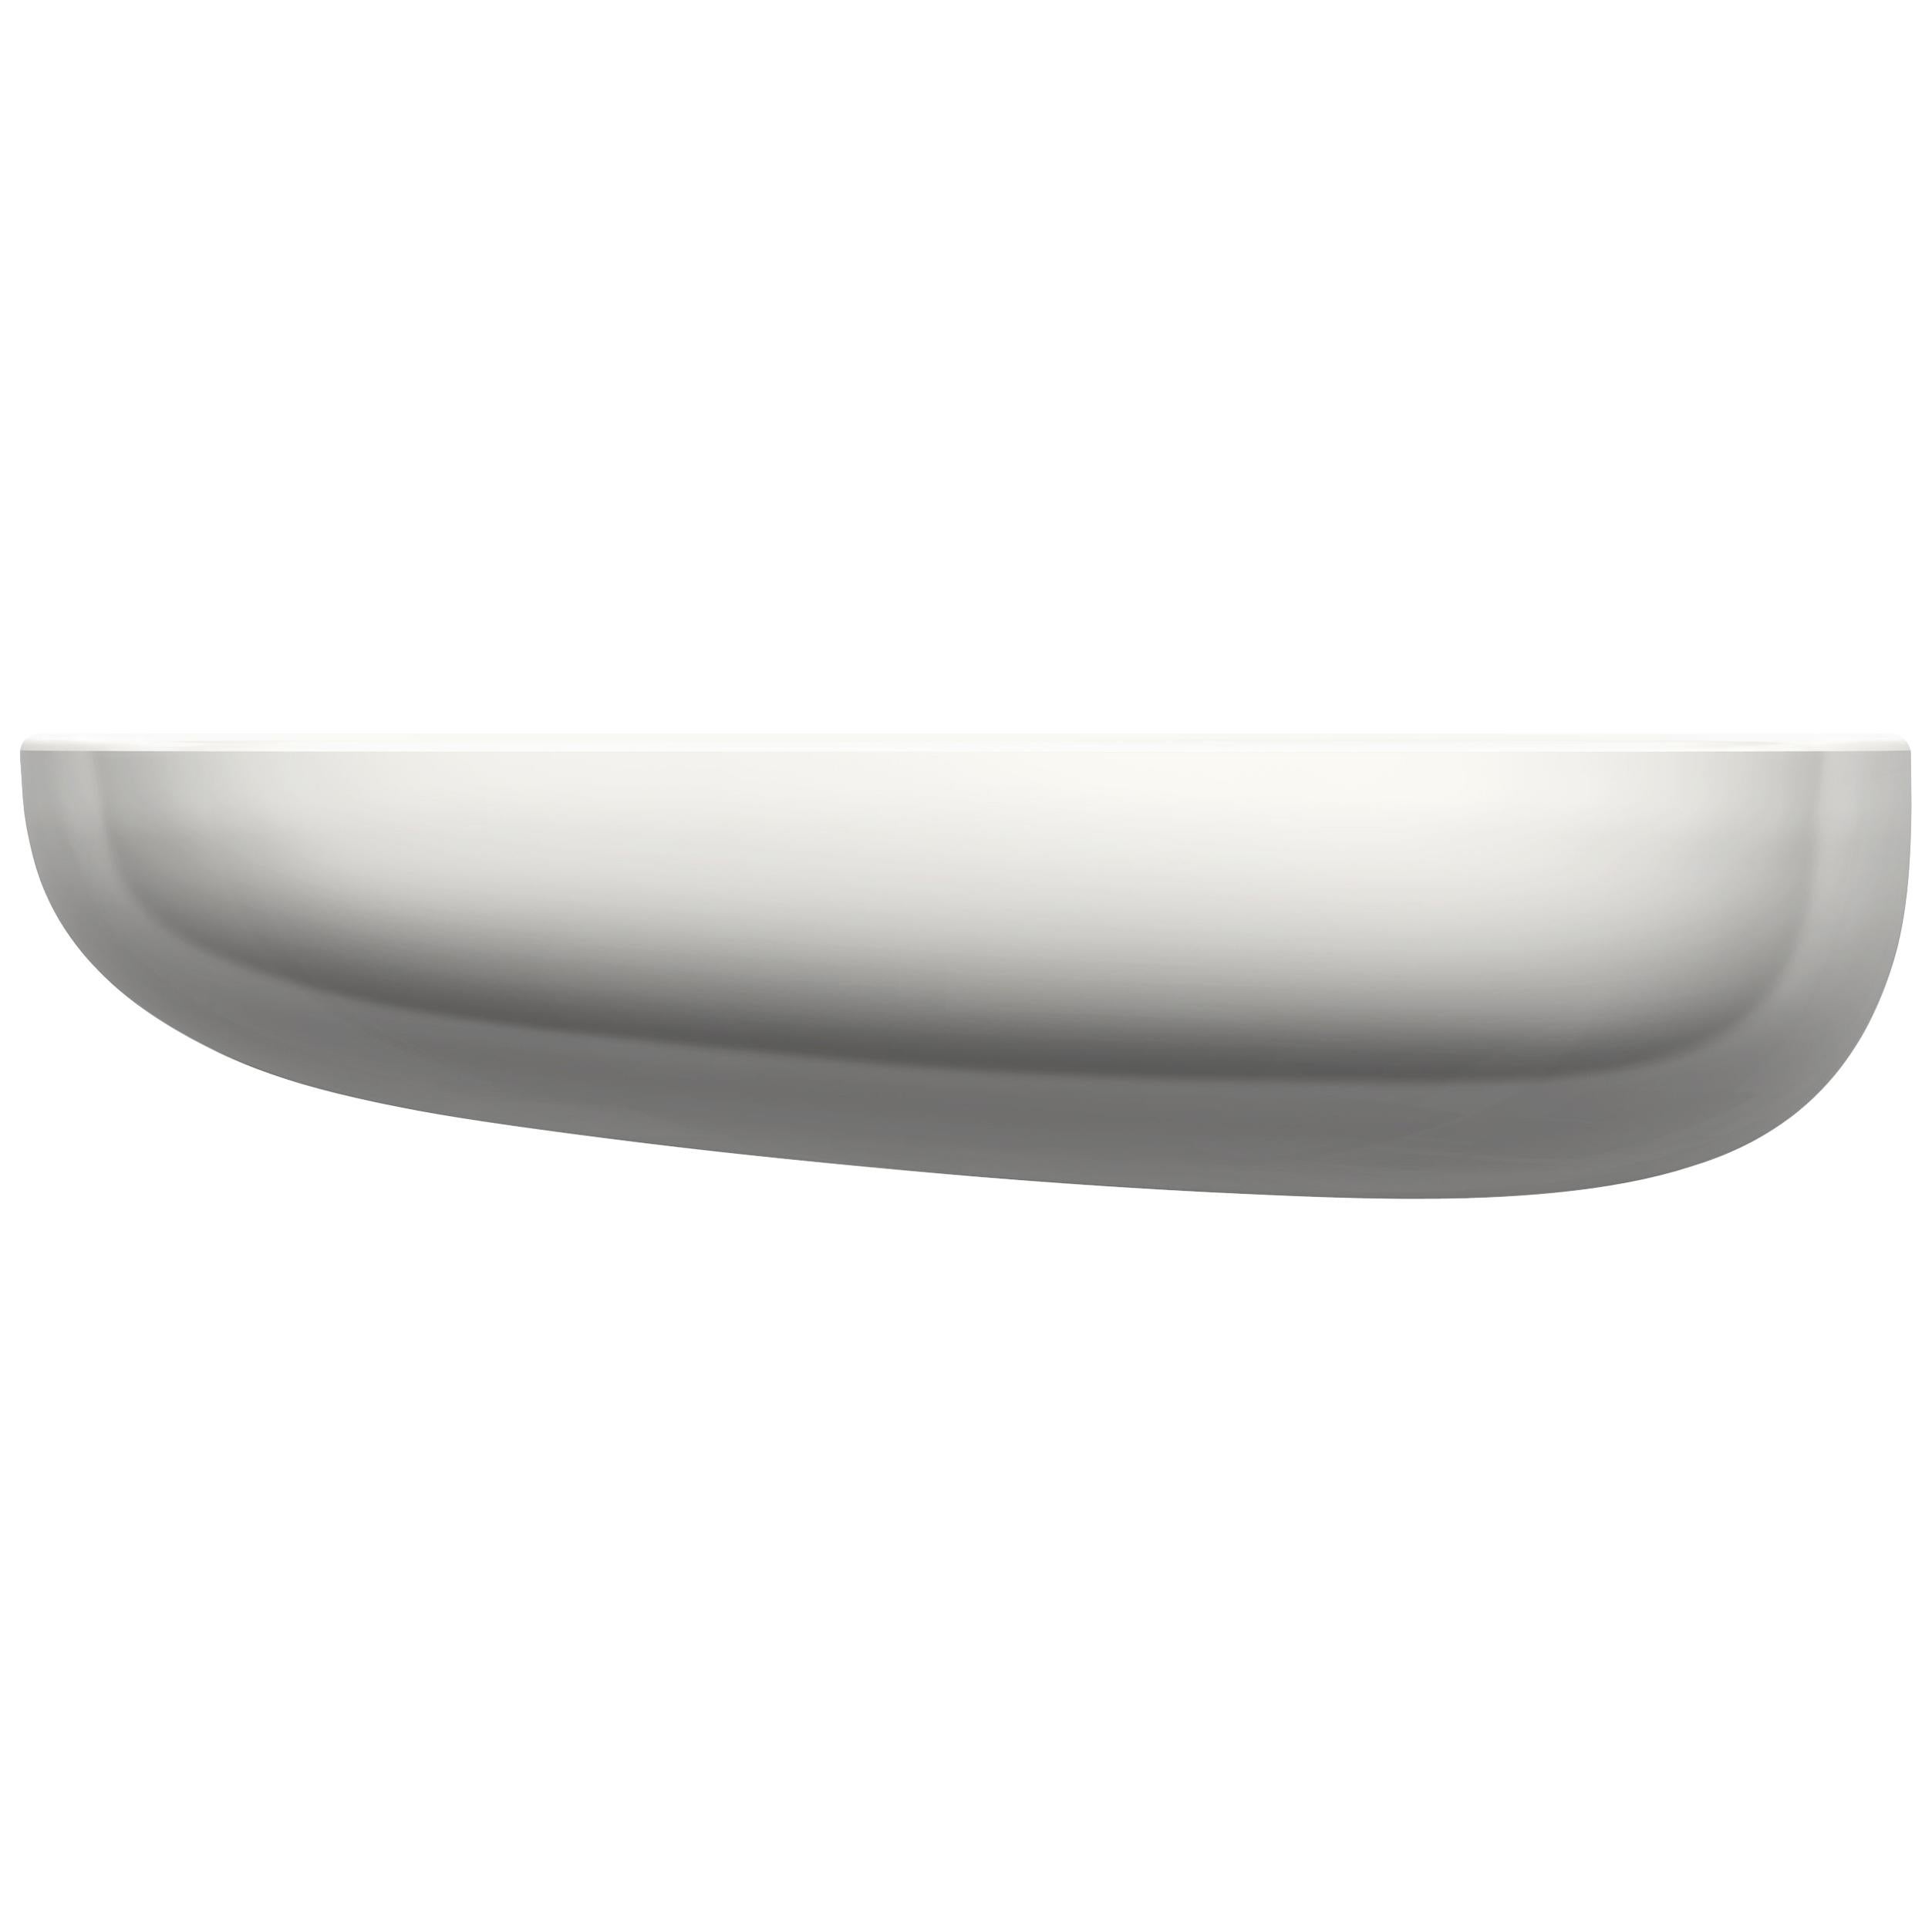 Vitra Medium Corniches in White by Ronan & Erwan Bouroullec For Sale